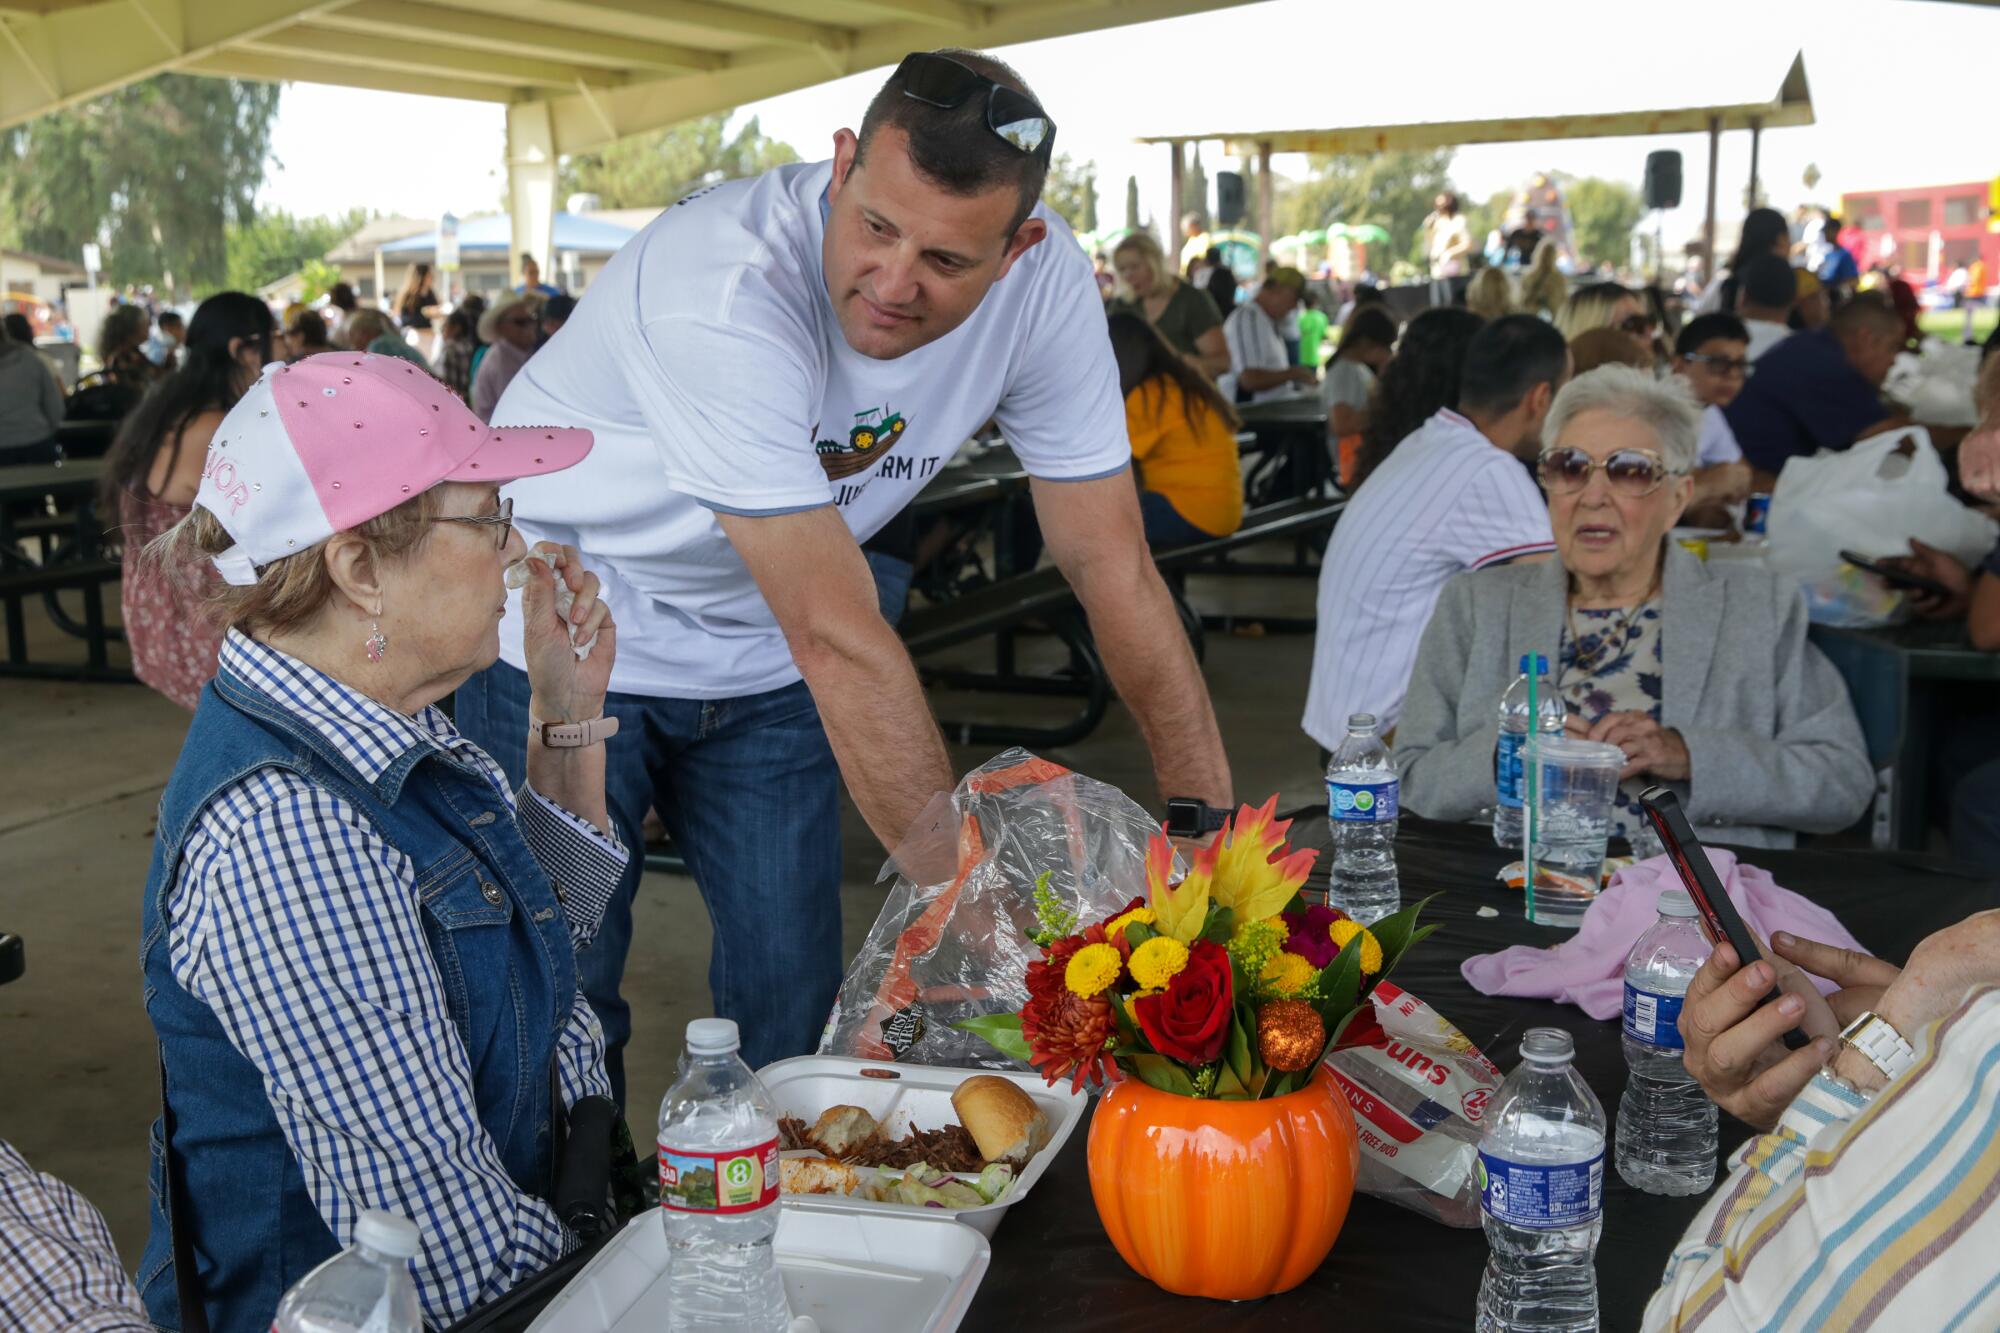 Rep. David Valadao, 45, leans over a table and talks to two older white women at a farm festival.